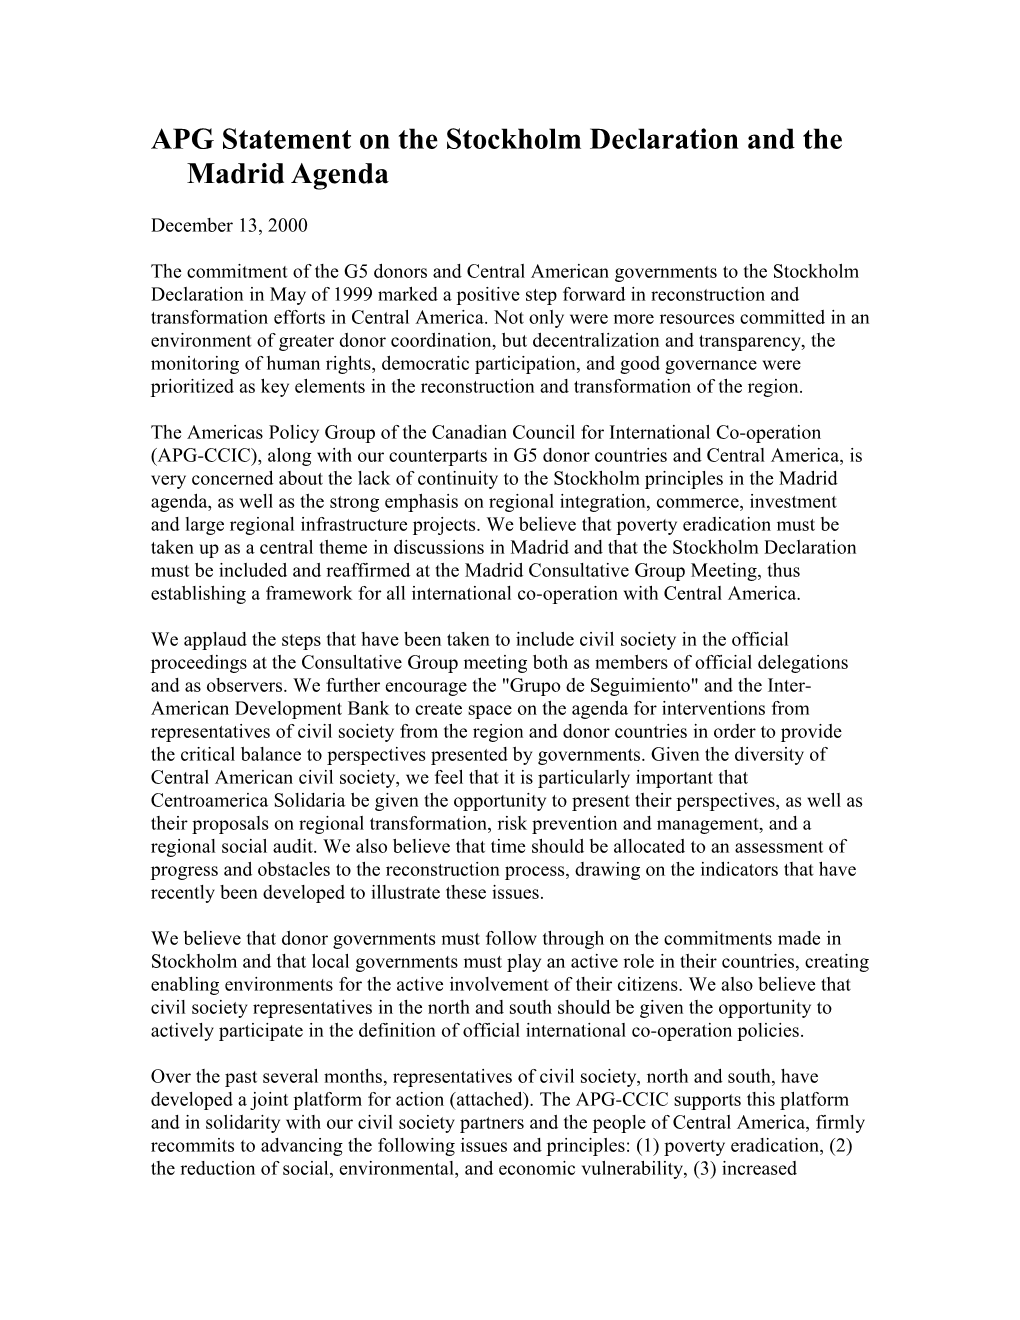 APG Statement on the Stockholm Declaration and the Madrid Agenda